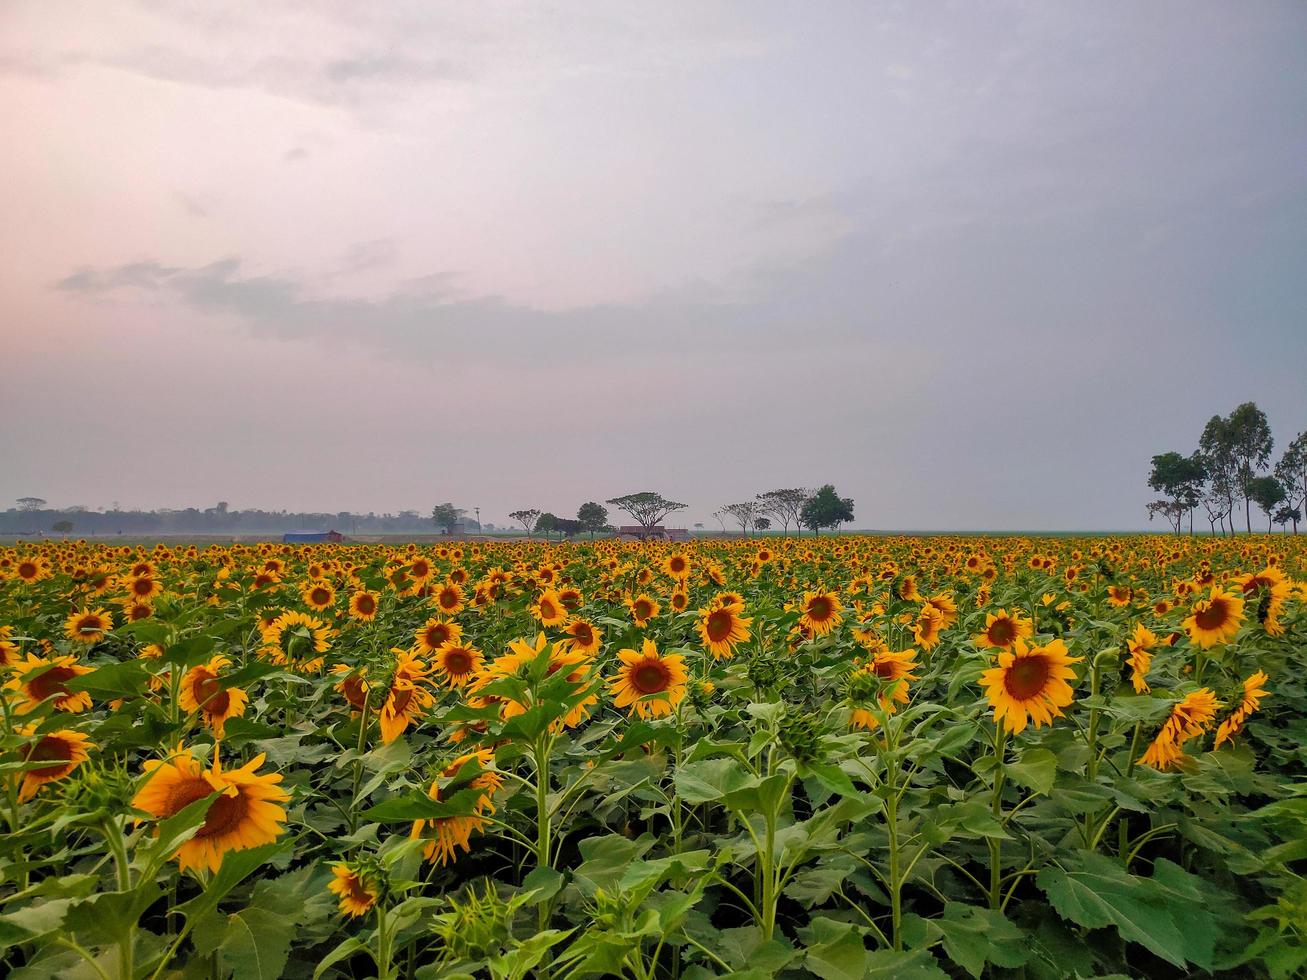 Sunflower fields and village, Shot of a sunflower field in the summer, an image of a field of sunflowers photo